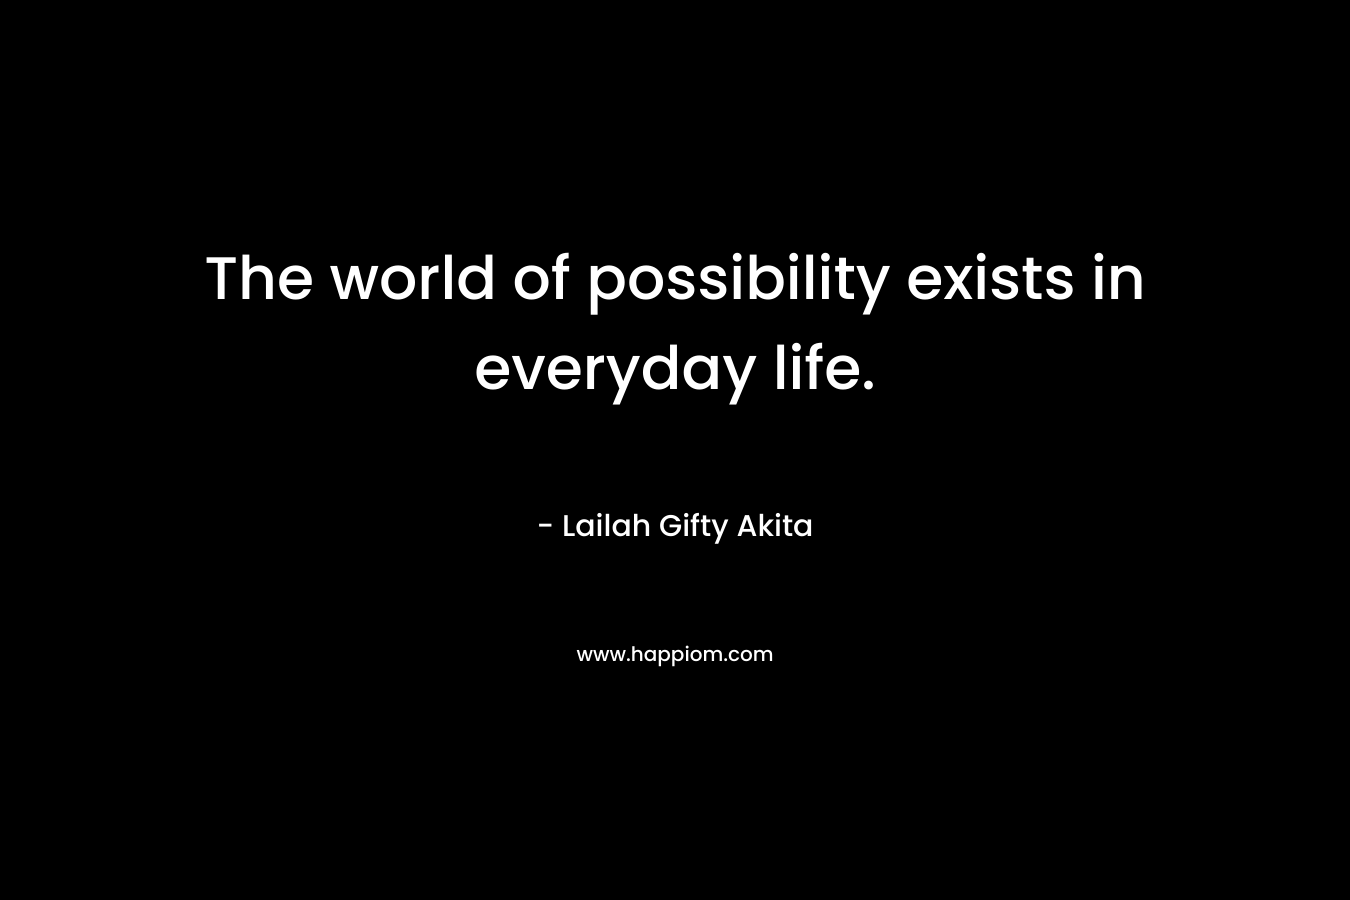 The world of possibility exists in everyday life.